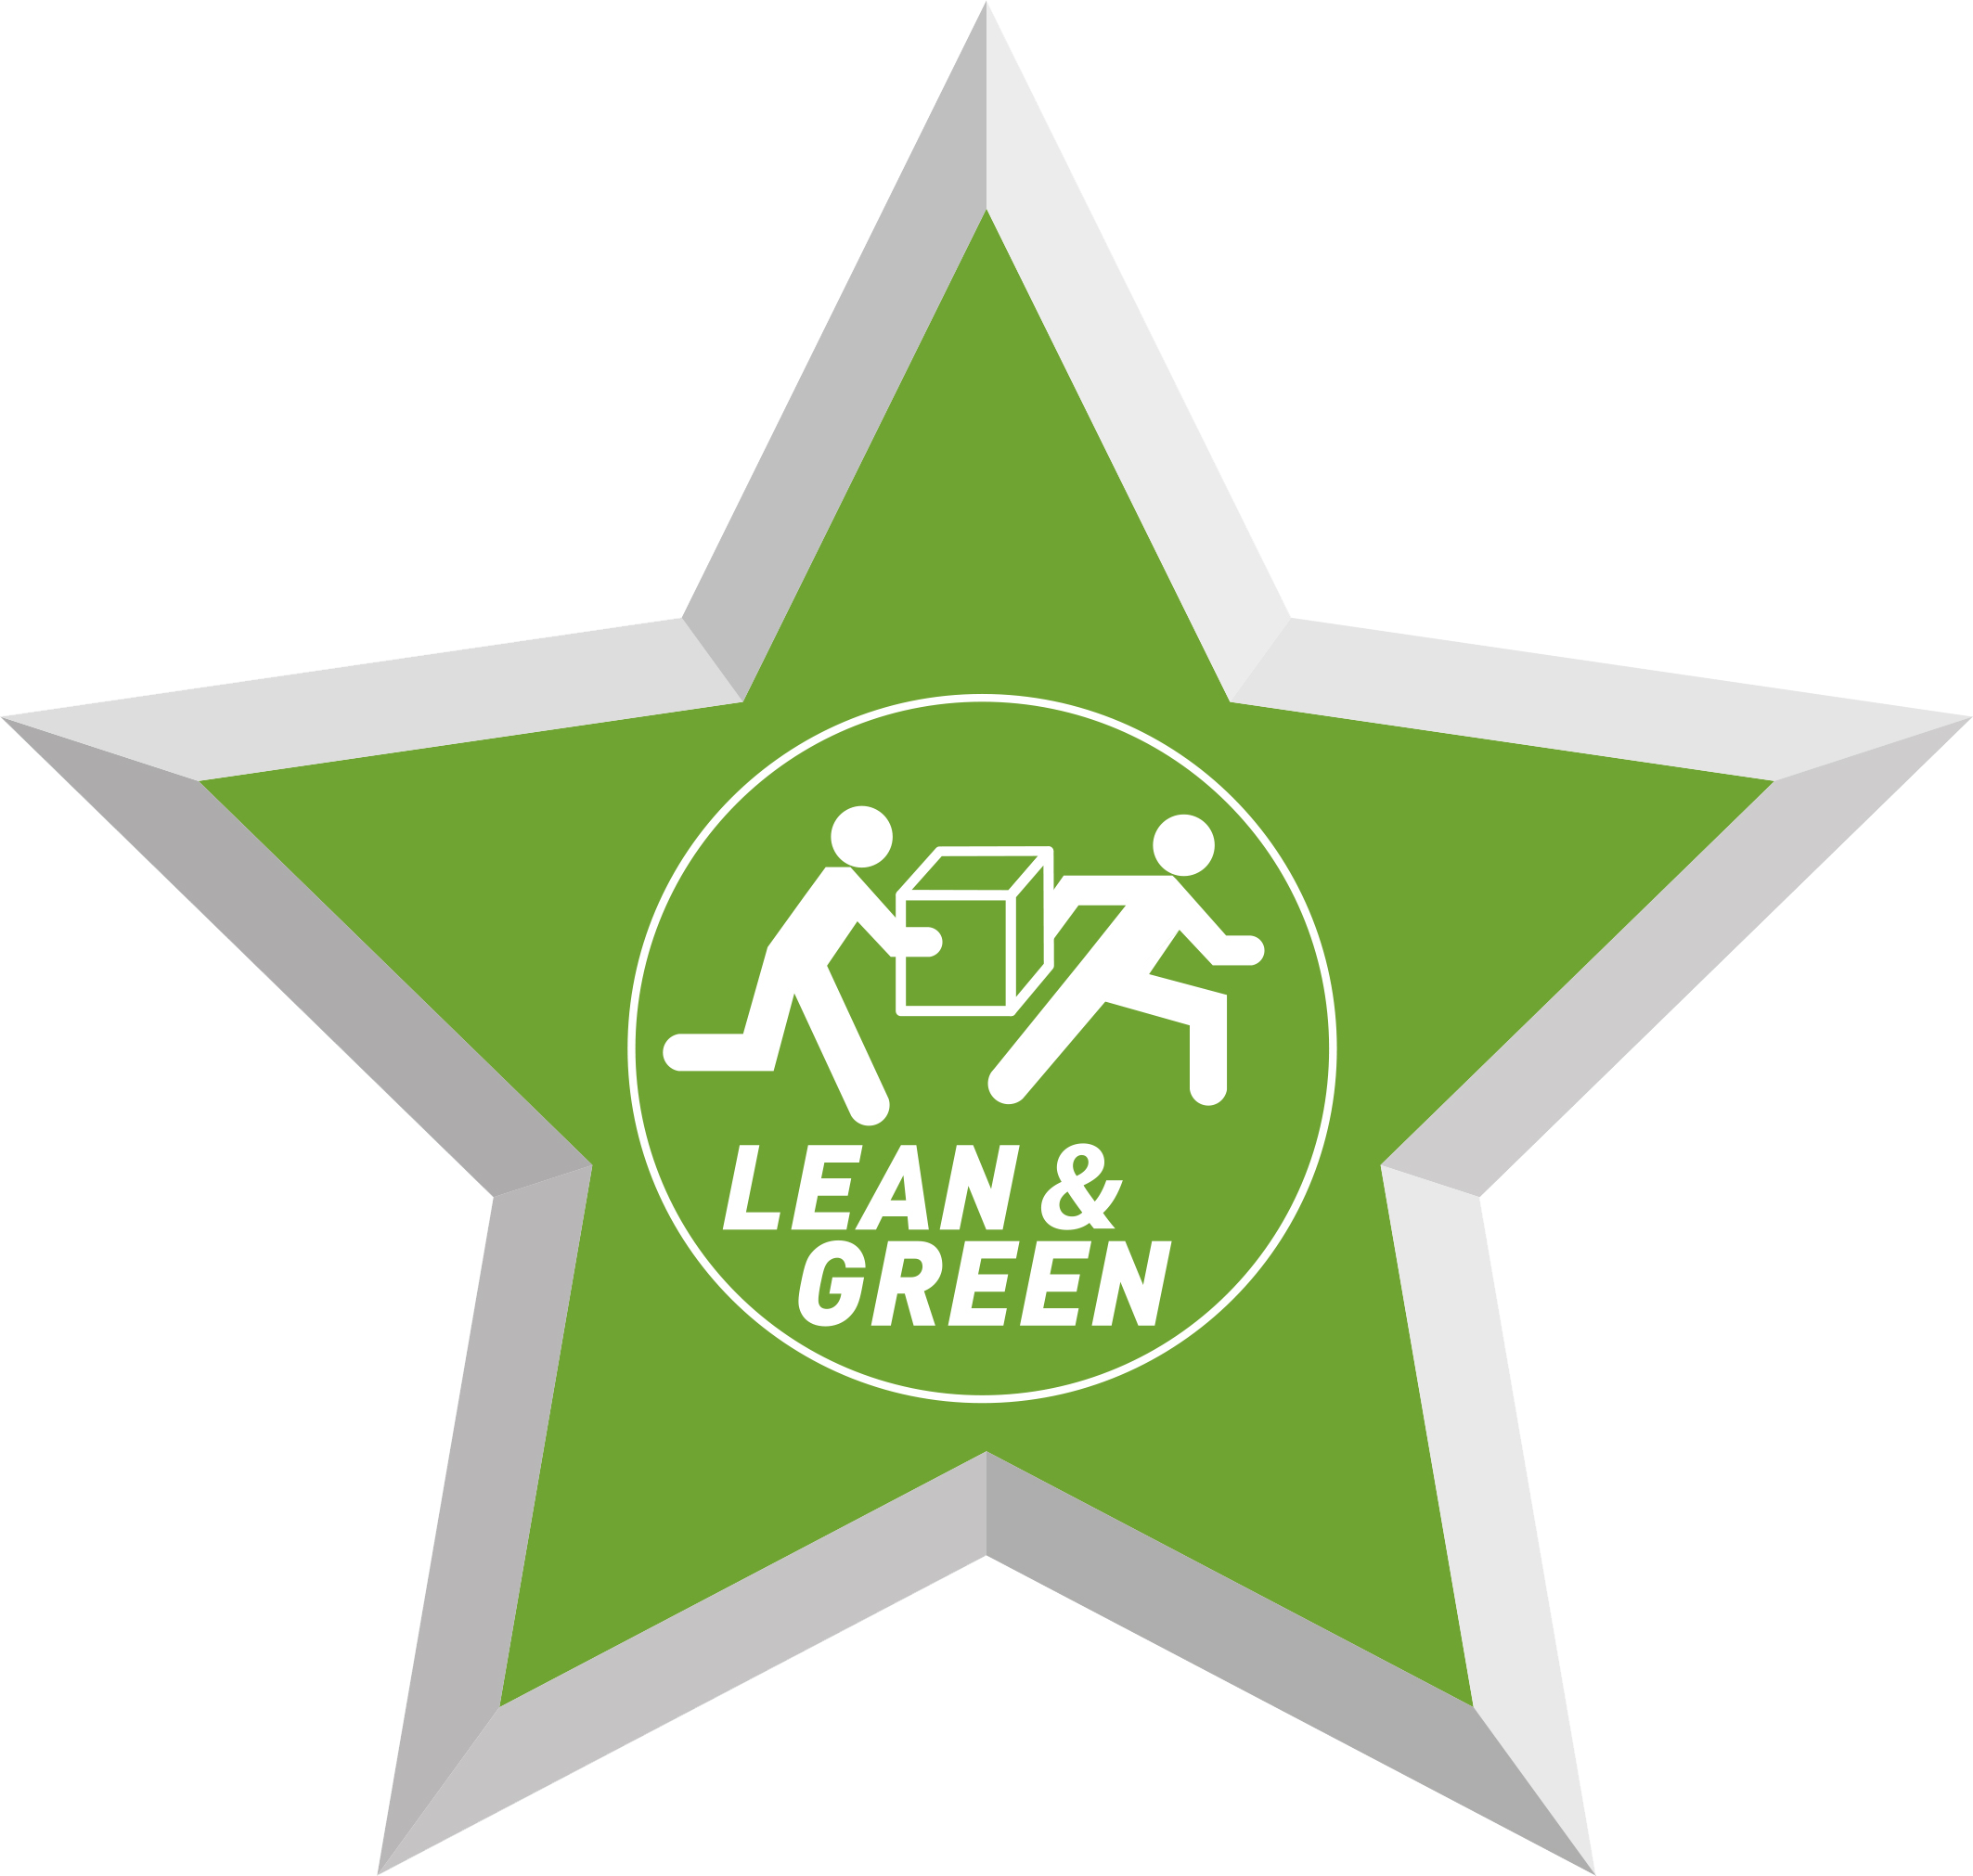 Lean & Green Star Rabelink - Lean And Green Award (2126x2022), Png Download